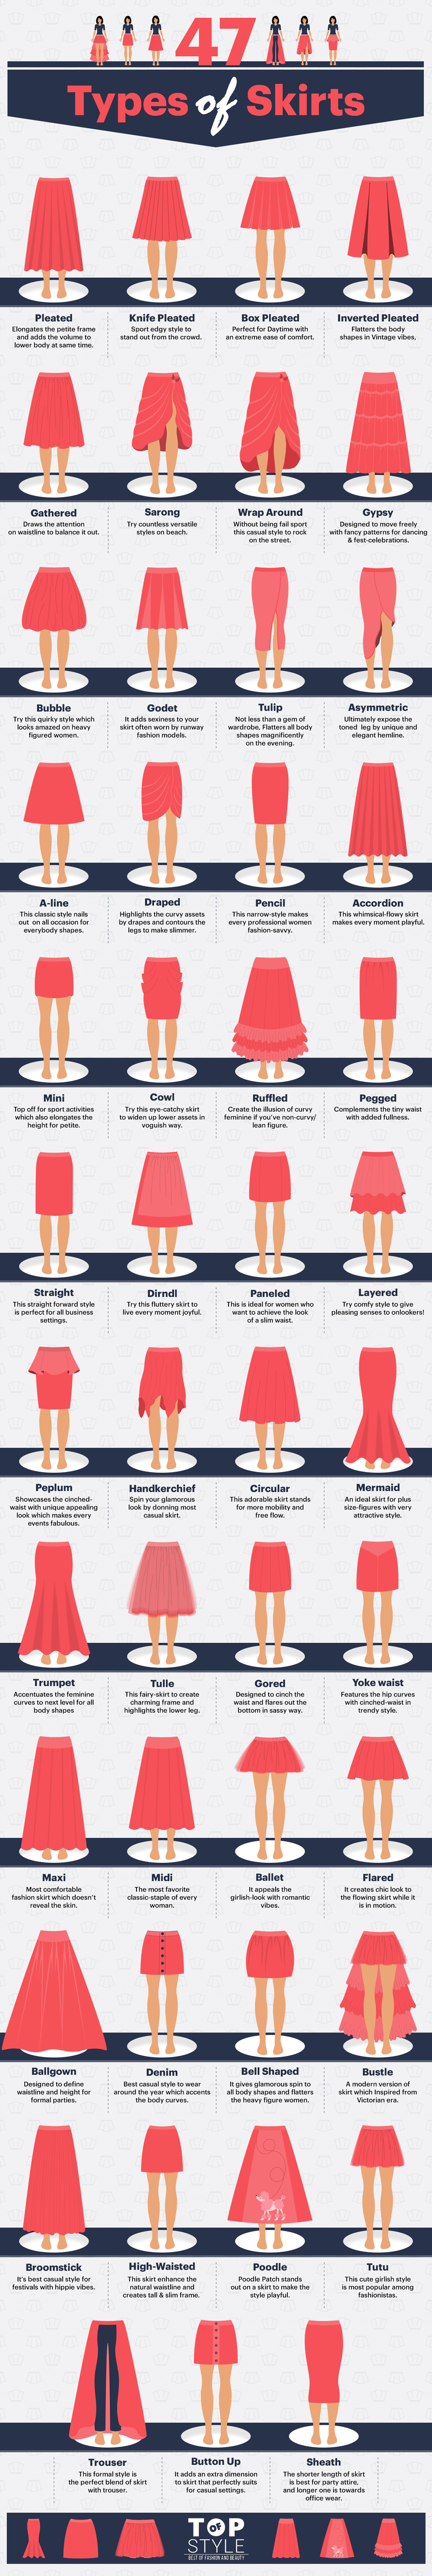 47 Types of Skirts with Names & Pictures - TopOfStyle Blog